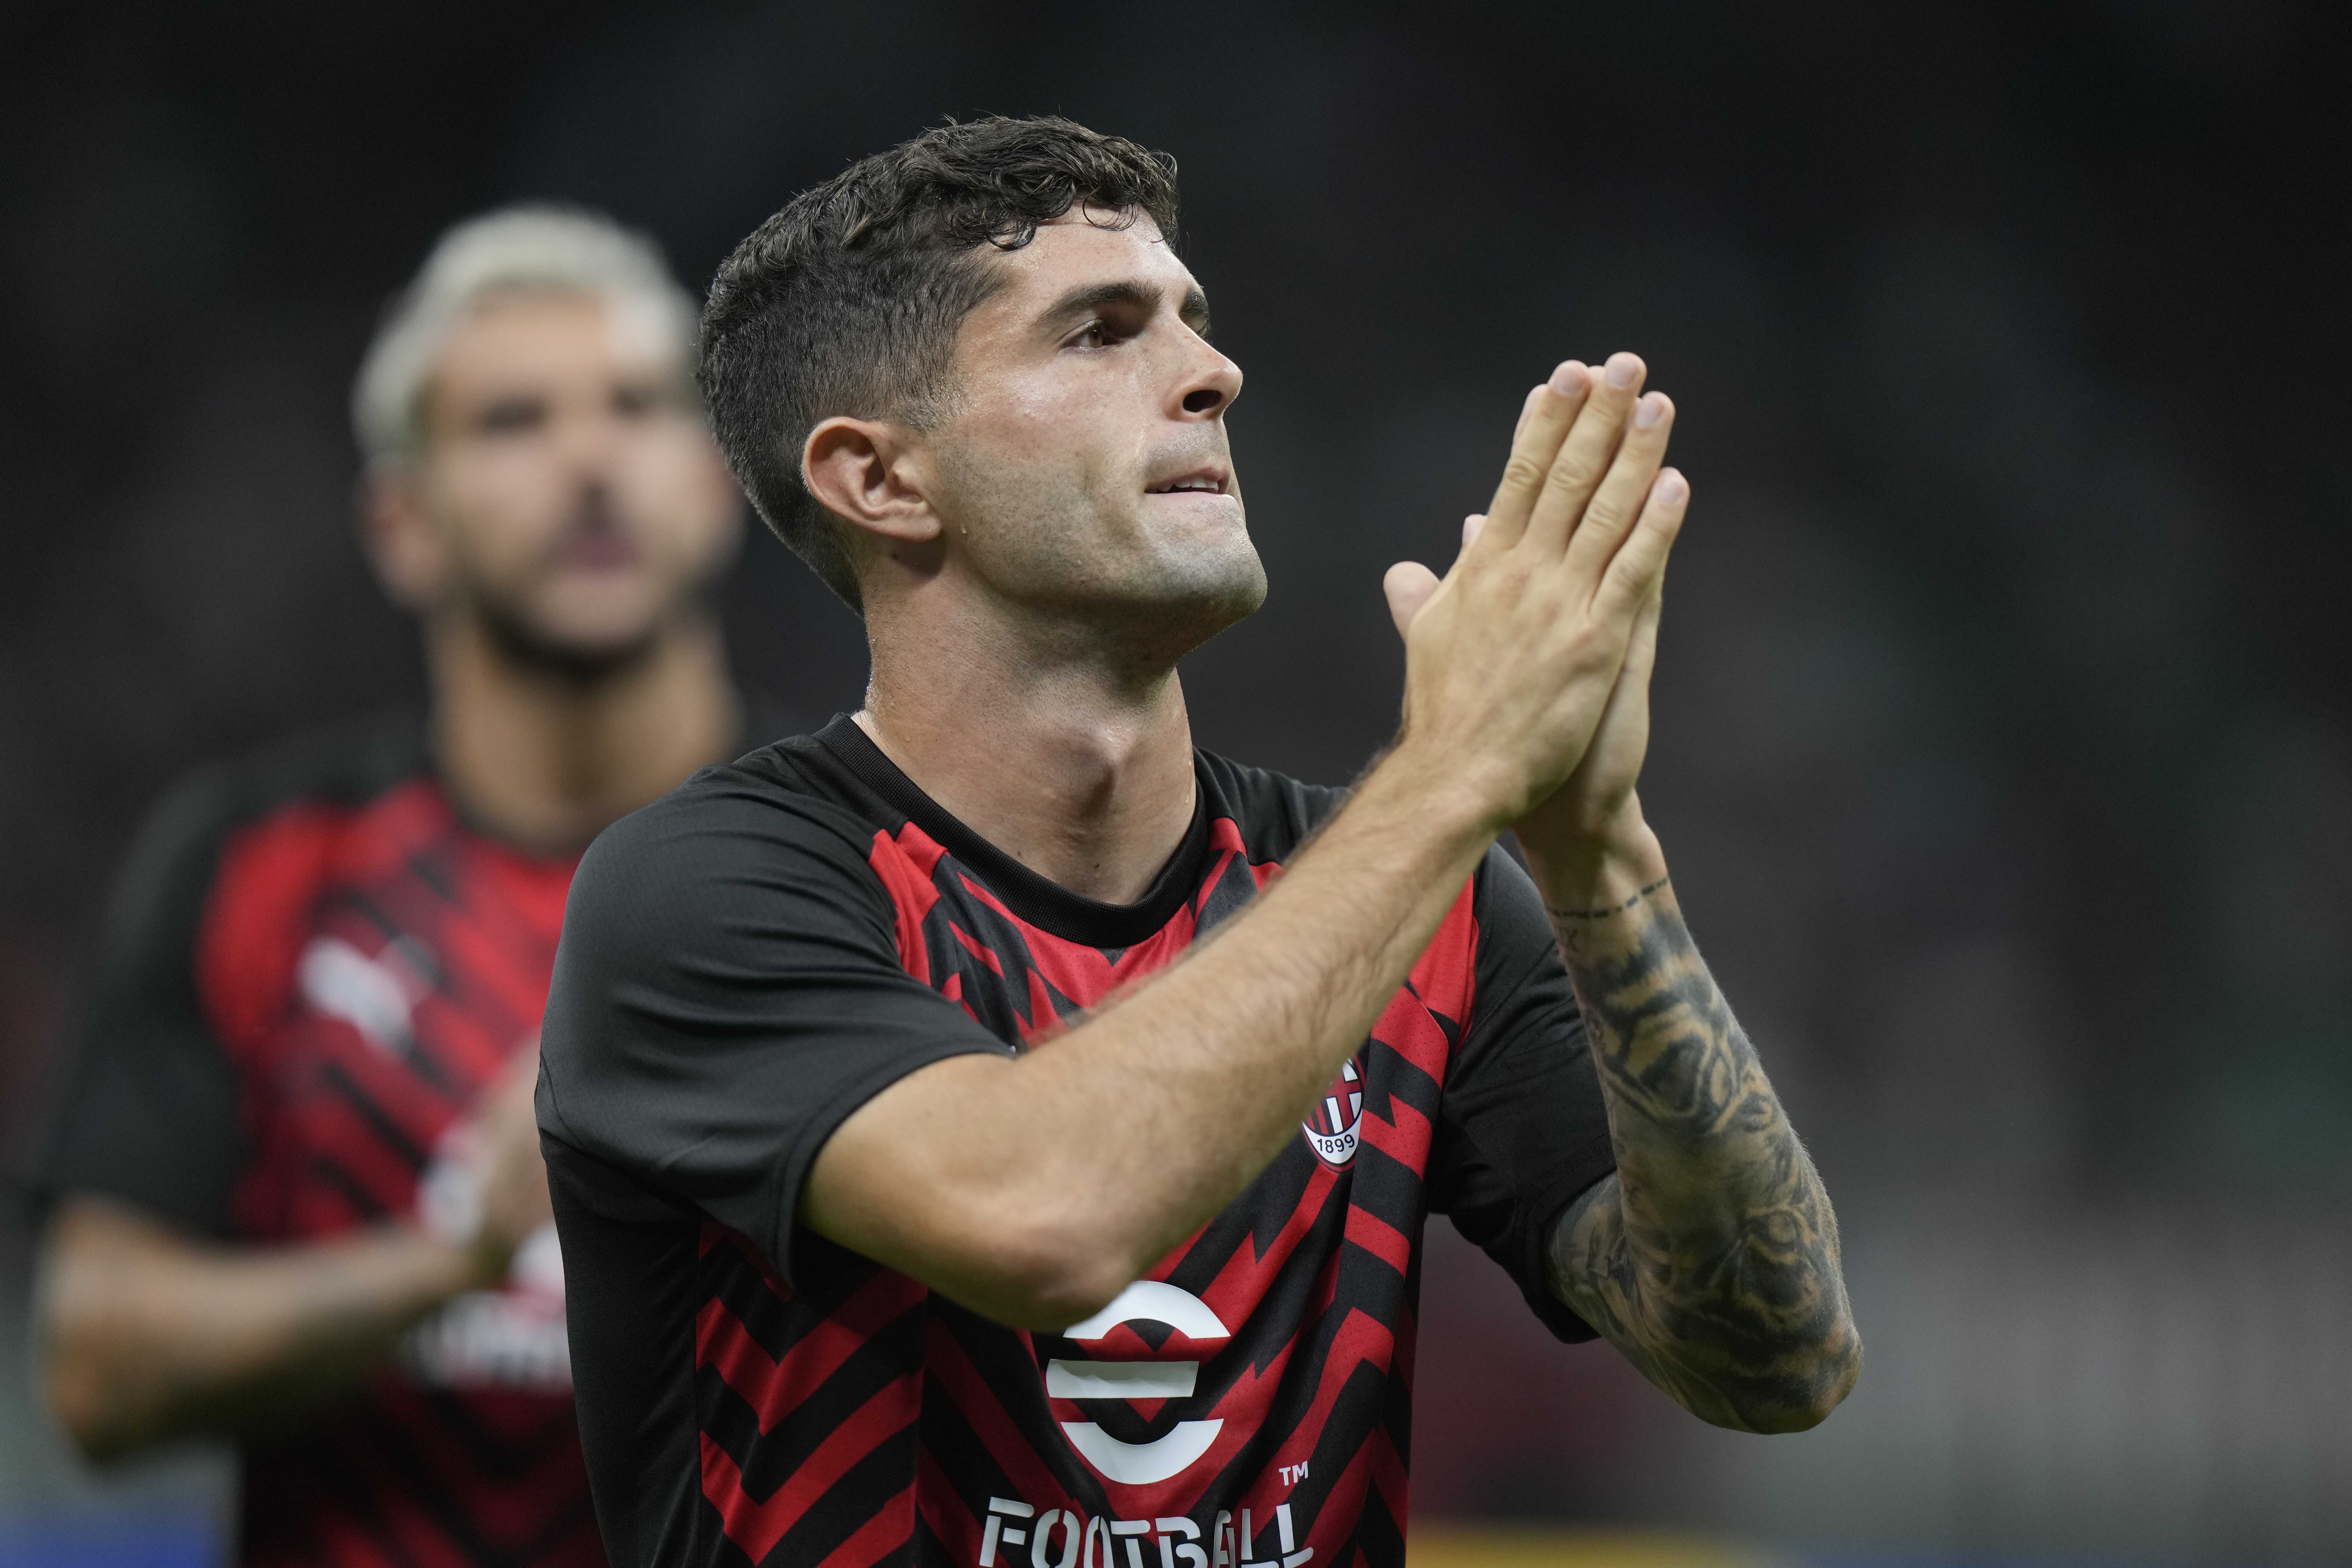 How to watch Christian Pulisic, AC Milan vs